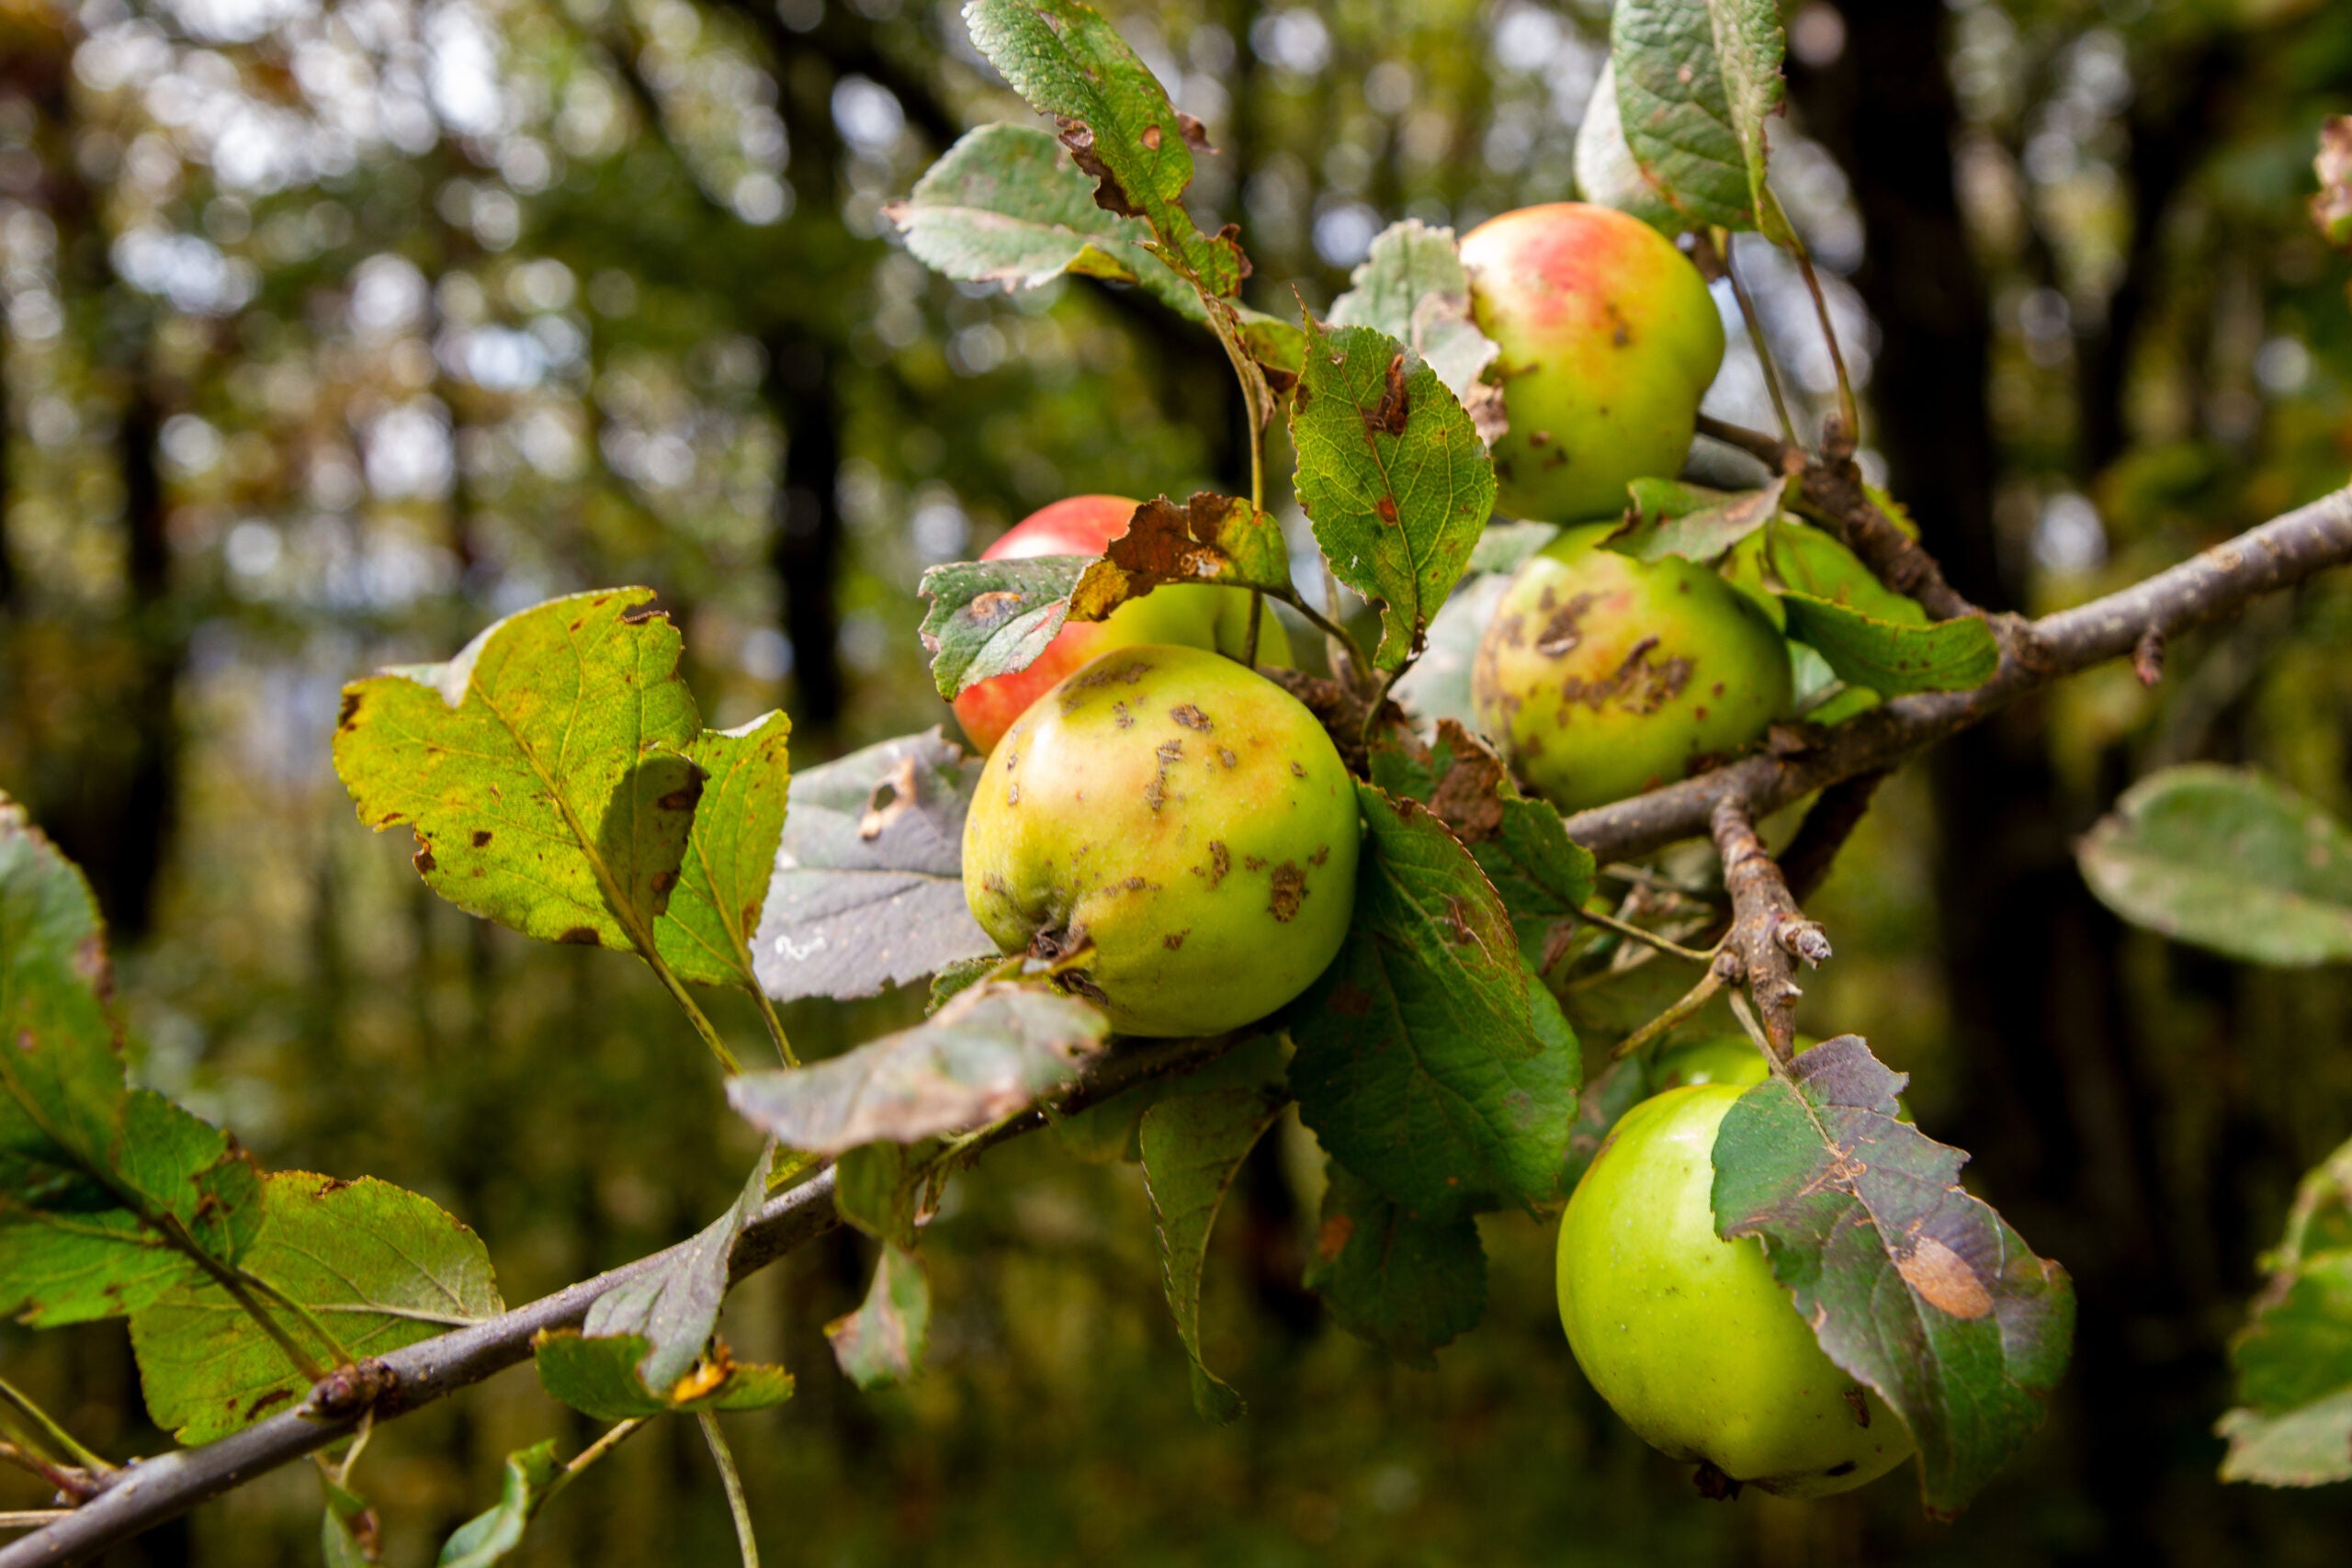 apples on the branch of a wild apple tree